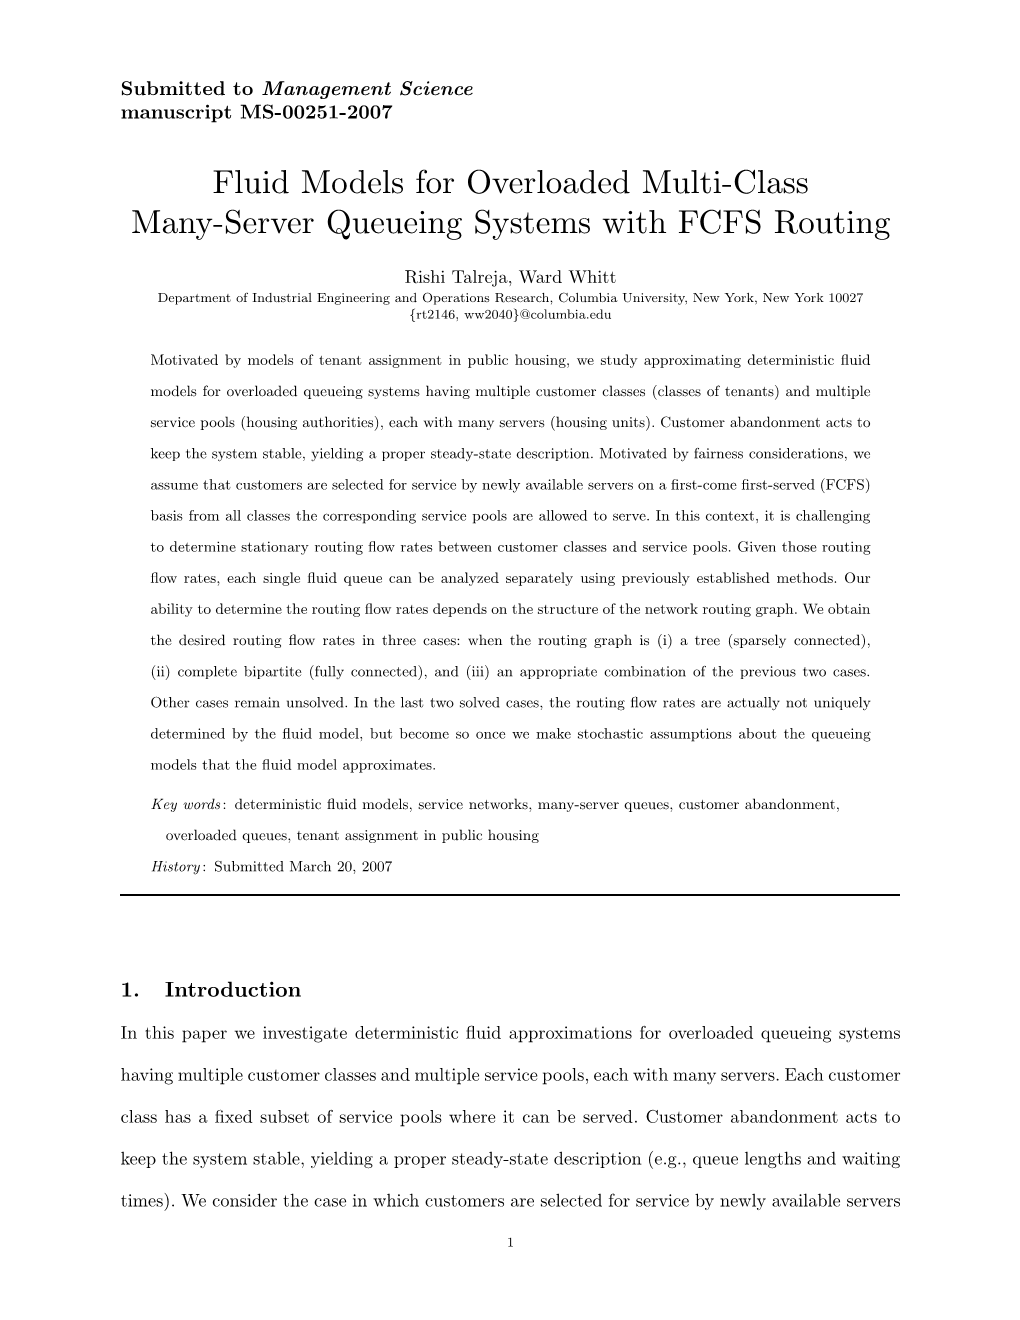 Fluid Models for Overloaded Multi-Class Many-Server Queueing Systems with FCFS Routing